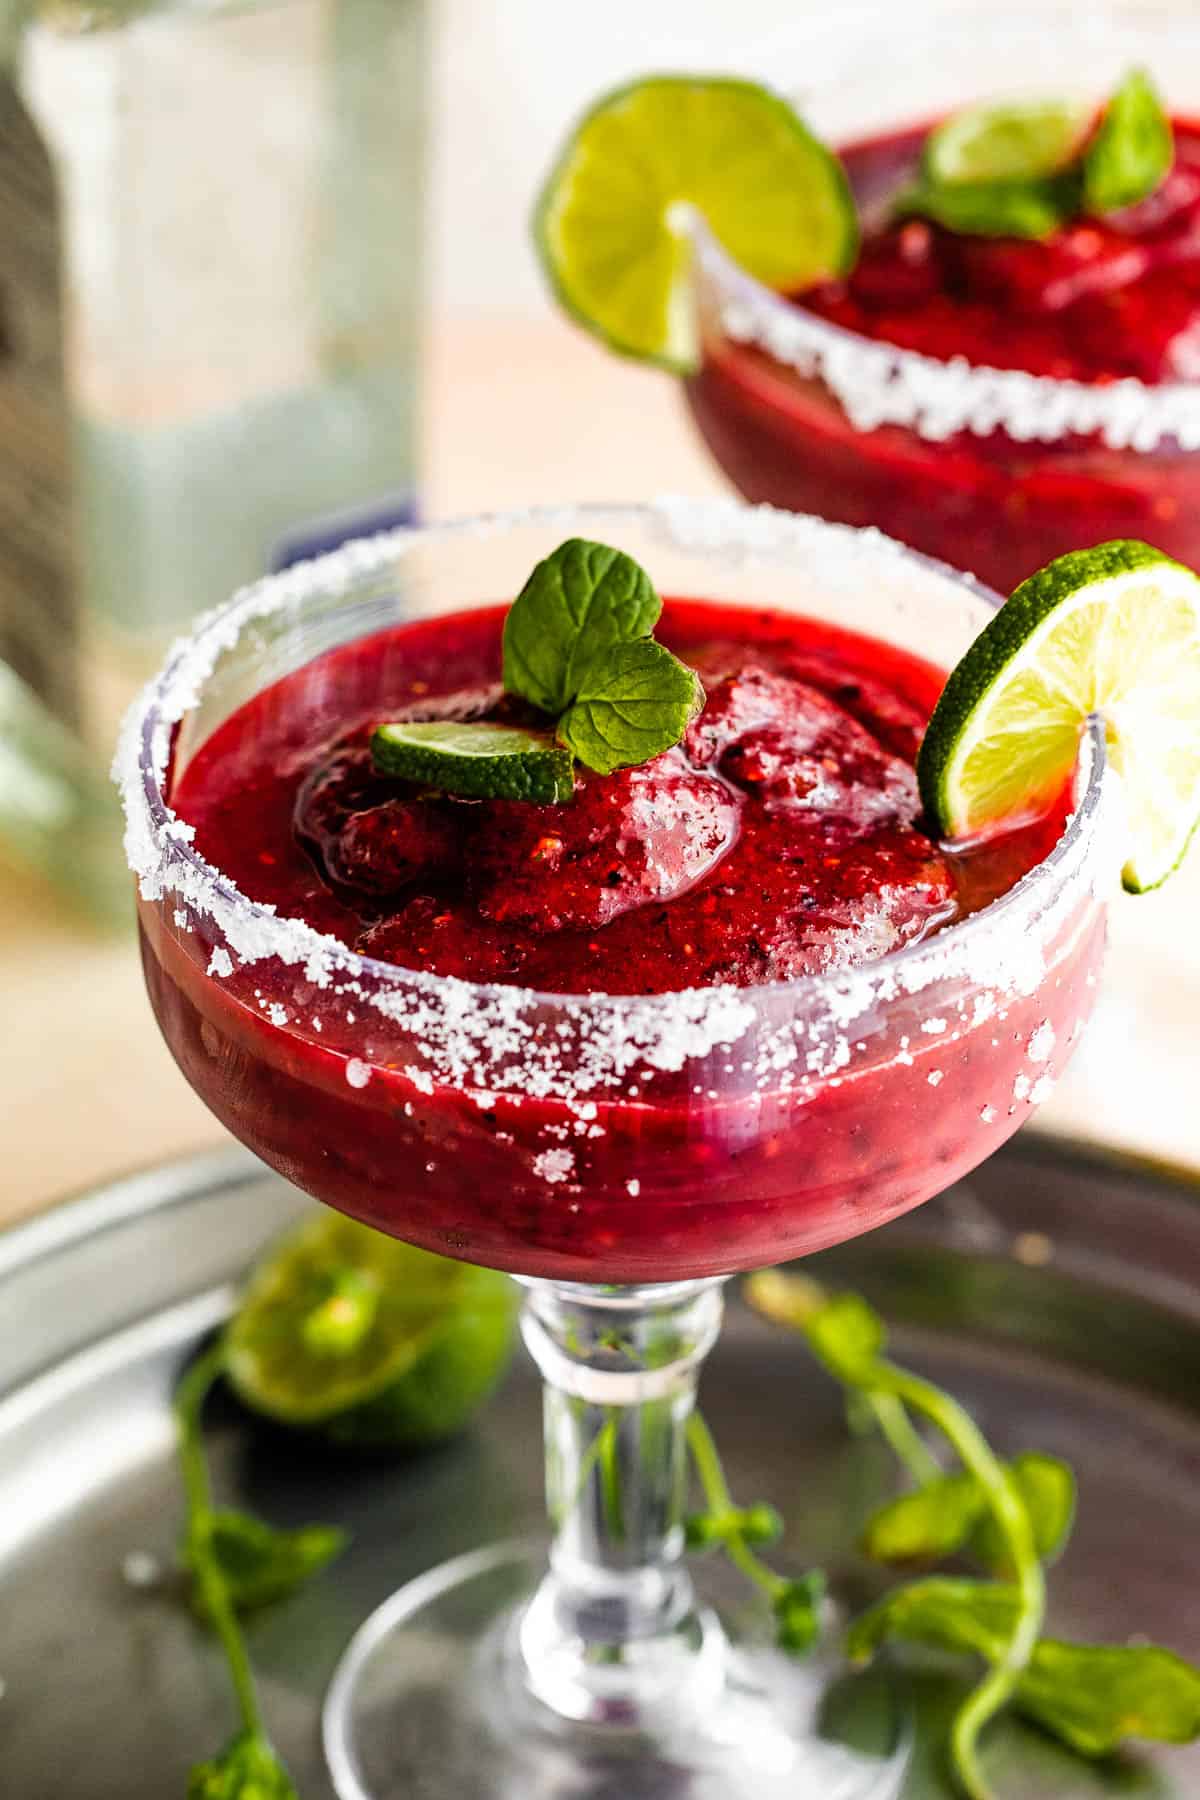 Frozen Berry Margarita served in a margarita glass with salted rims, slice of lime, and mint